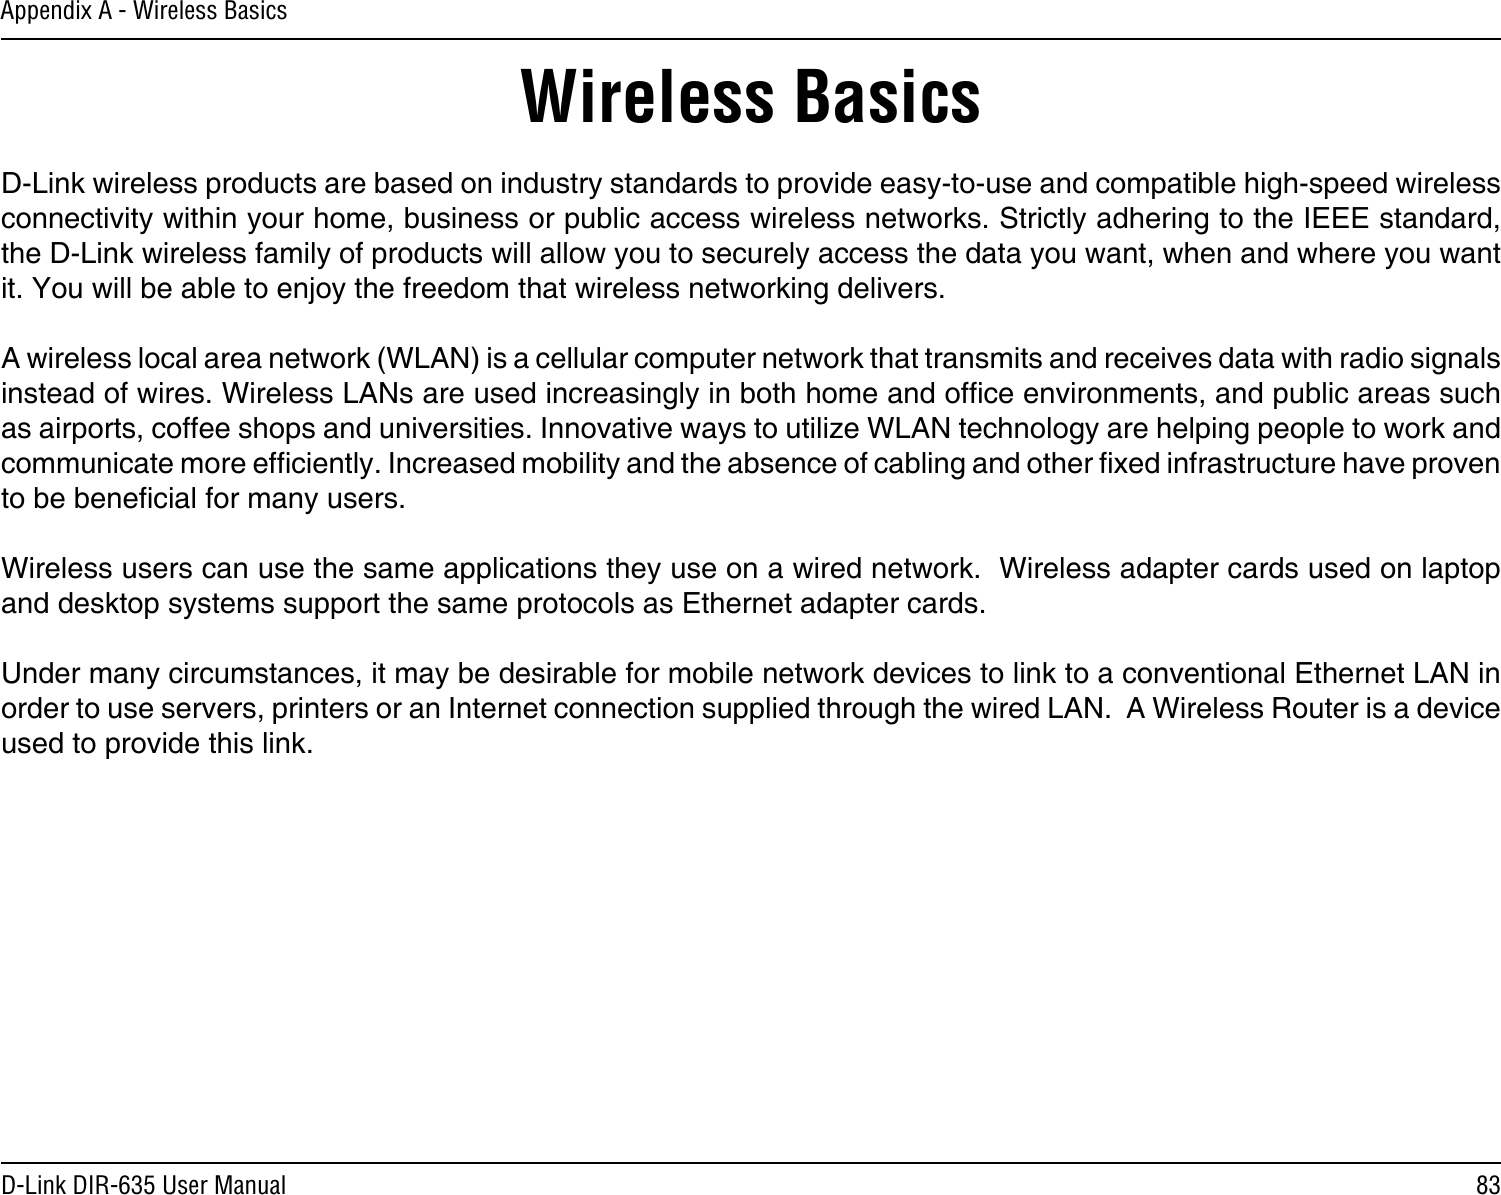 83D-Link DIR-635 User ManualAppendix A - Wireless BasicsD-Link wireless products are based on industry standards to provide easy-to-use and compatible high-speed wireless connectivity within your home, business or public access wireless networks. Strictly adhering to the IEEE standard, the D-Link wireless family of products will allow you to securely access the data you want, when and where you want it. You will be able to enjoy the freedom that wireless networking delivers.A wireless local area network (WLAN) is a cellular computer network that transmits and receives data with radio signals instead of wires. Wireless LANs are used increasingly in both home and ofce environments, and public areas such as airports, coffee shops and universities. Innovative ways to utilize WLAN technology are helping people to work and communicate more efciently. Increased mobility and the absence of cabling and other xed infrastructure have proven to be benecial for many users. Wireless users can use the same applications they use on a wired network.  Wireless adapter cards used on laptop and desktop systems support the same protocols as Ethernet adapter cards. Under many circumstances, it may be desirable for mobile network devices to link to a conventional Ethernet LAN in order to use servers, printers or an Internet connection supplied through the wired LAN.  A Wireless Router is a device used to provide this link.Wireless Basics